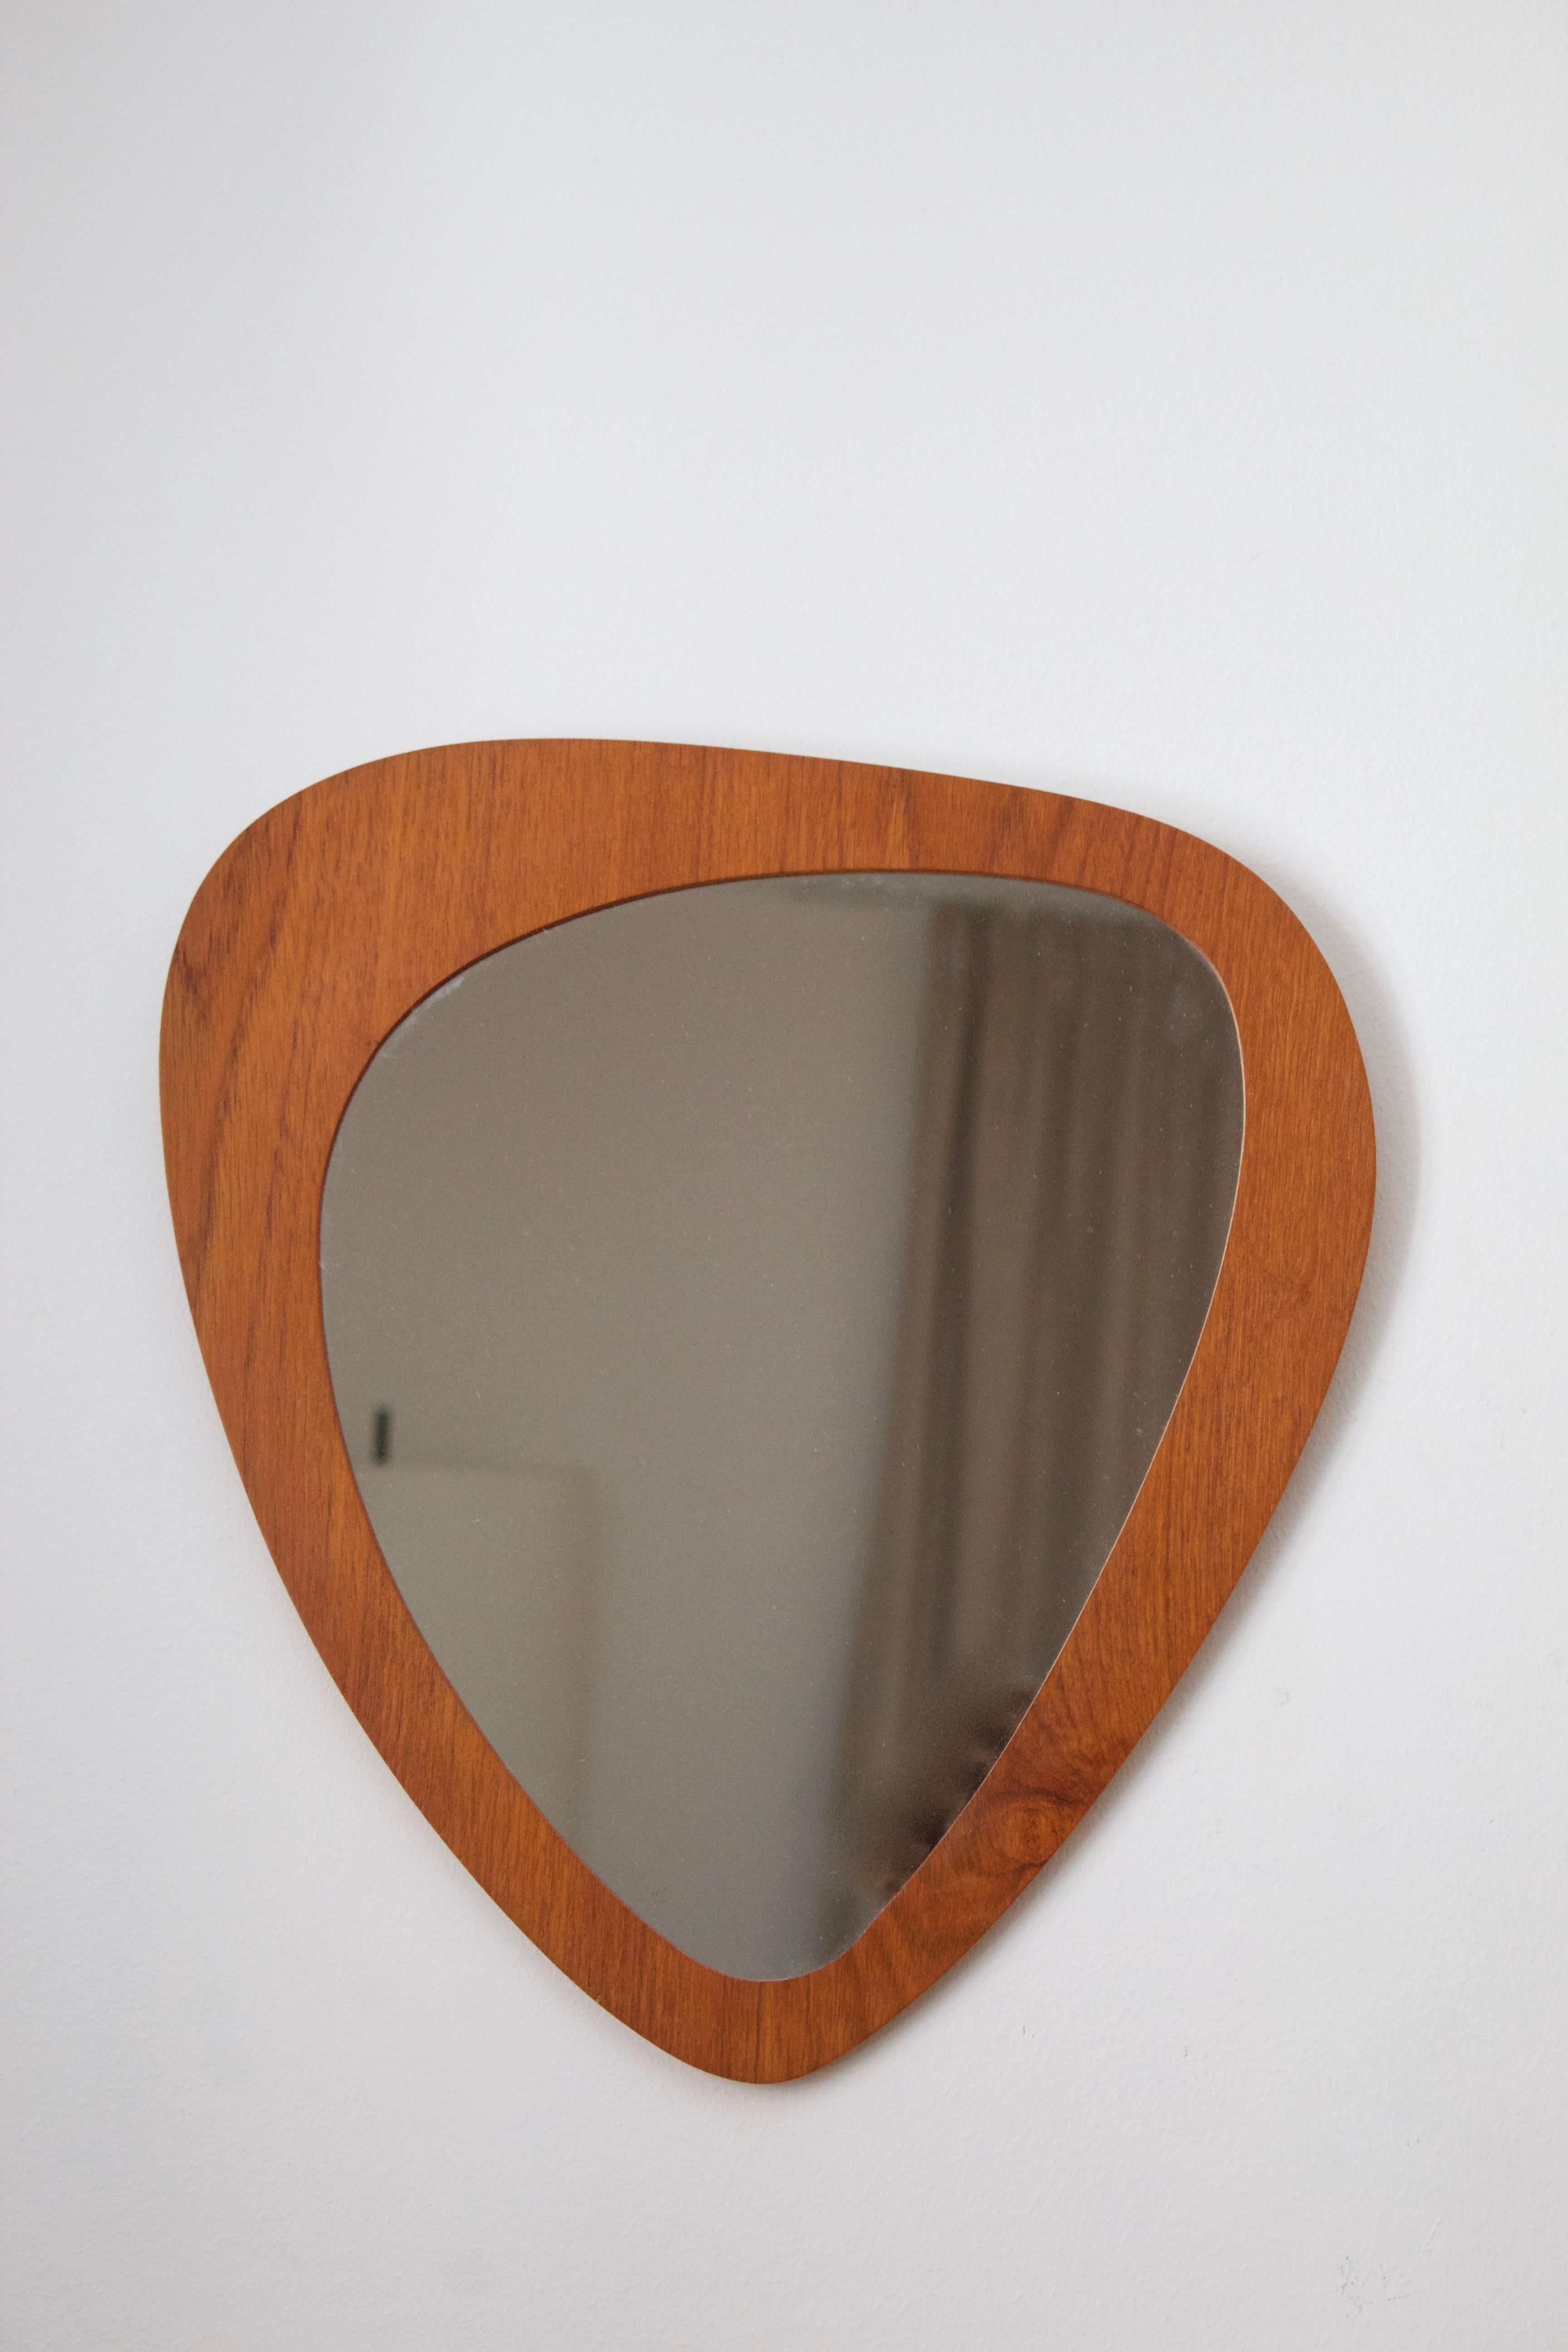 An organic wall mirror. Designed and produced in Sweden, c. 1950s-1960s.

